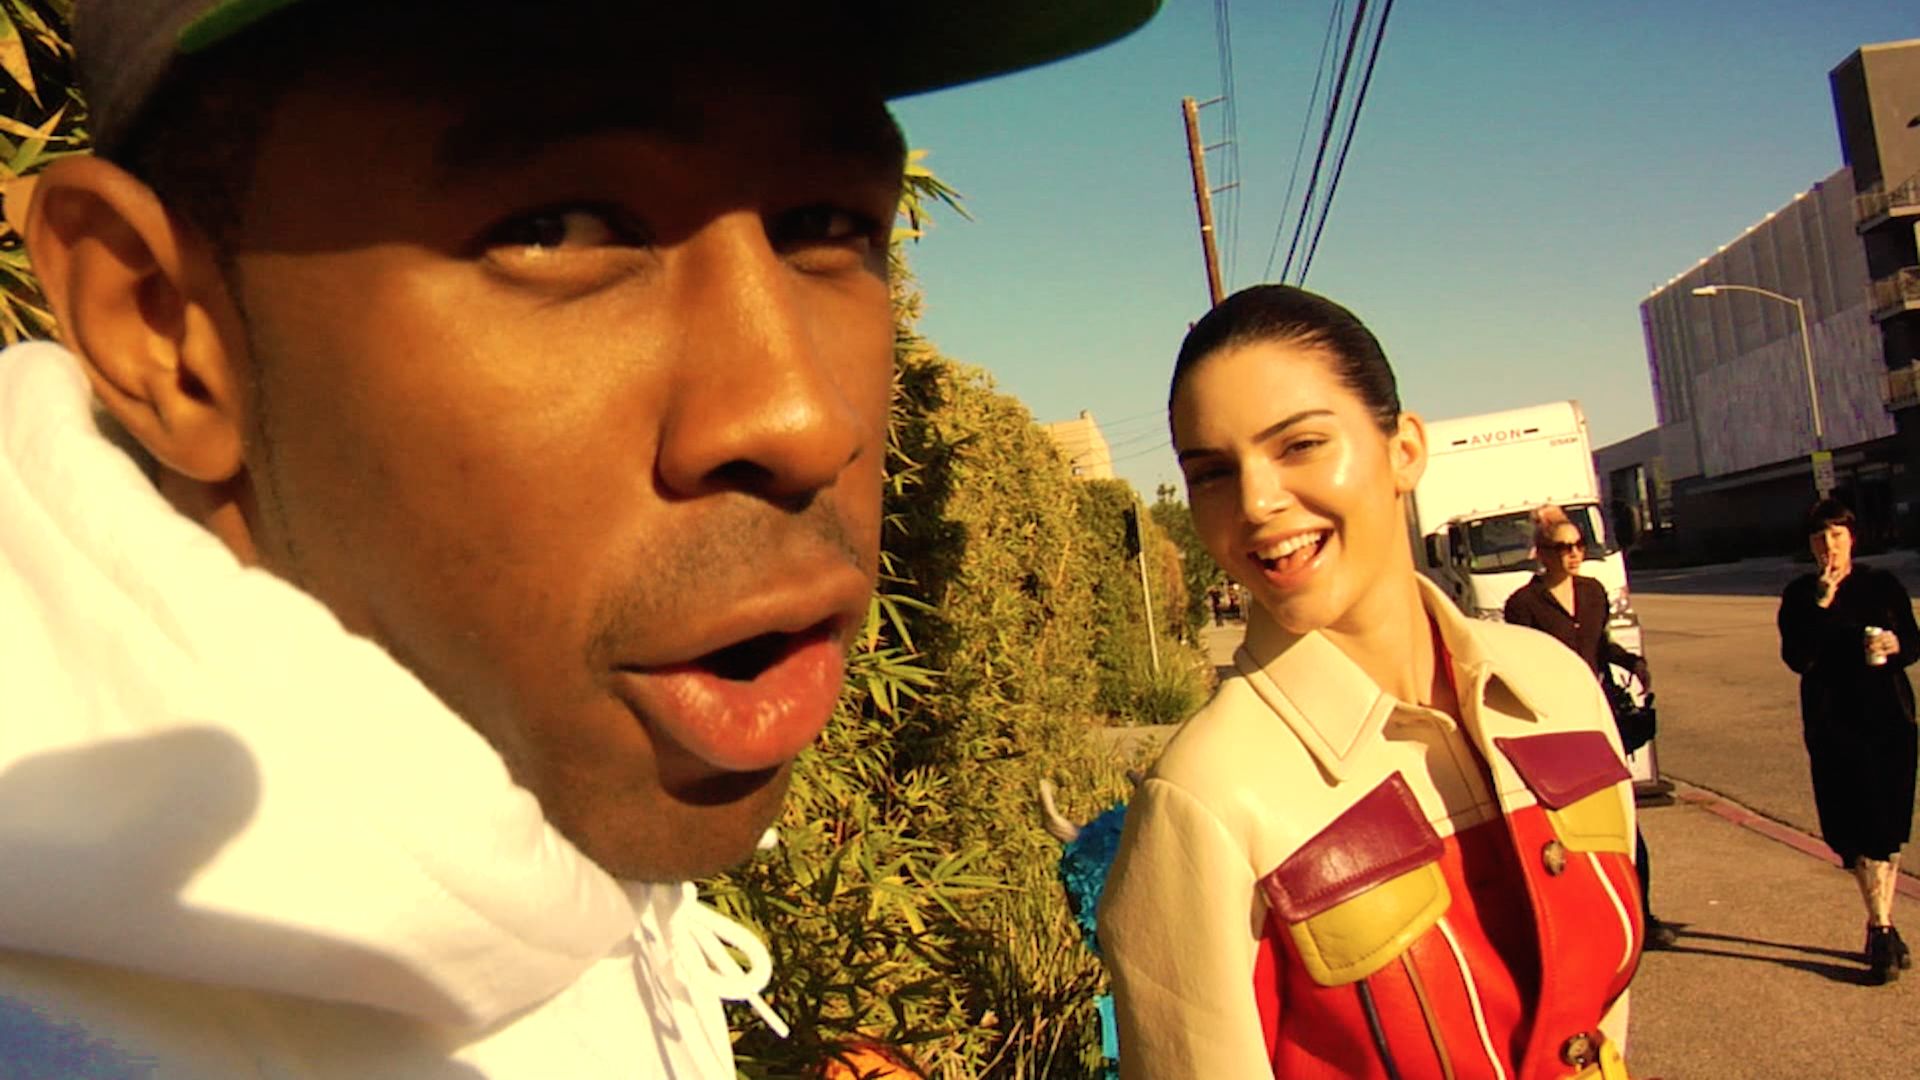 Watch Kendall Jenner; Tyler, The Creator; and Travis “Taco” Bennett Take  Over the Vogue Set, On Set with Vogue